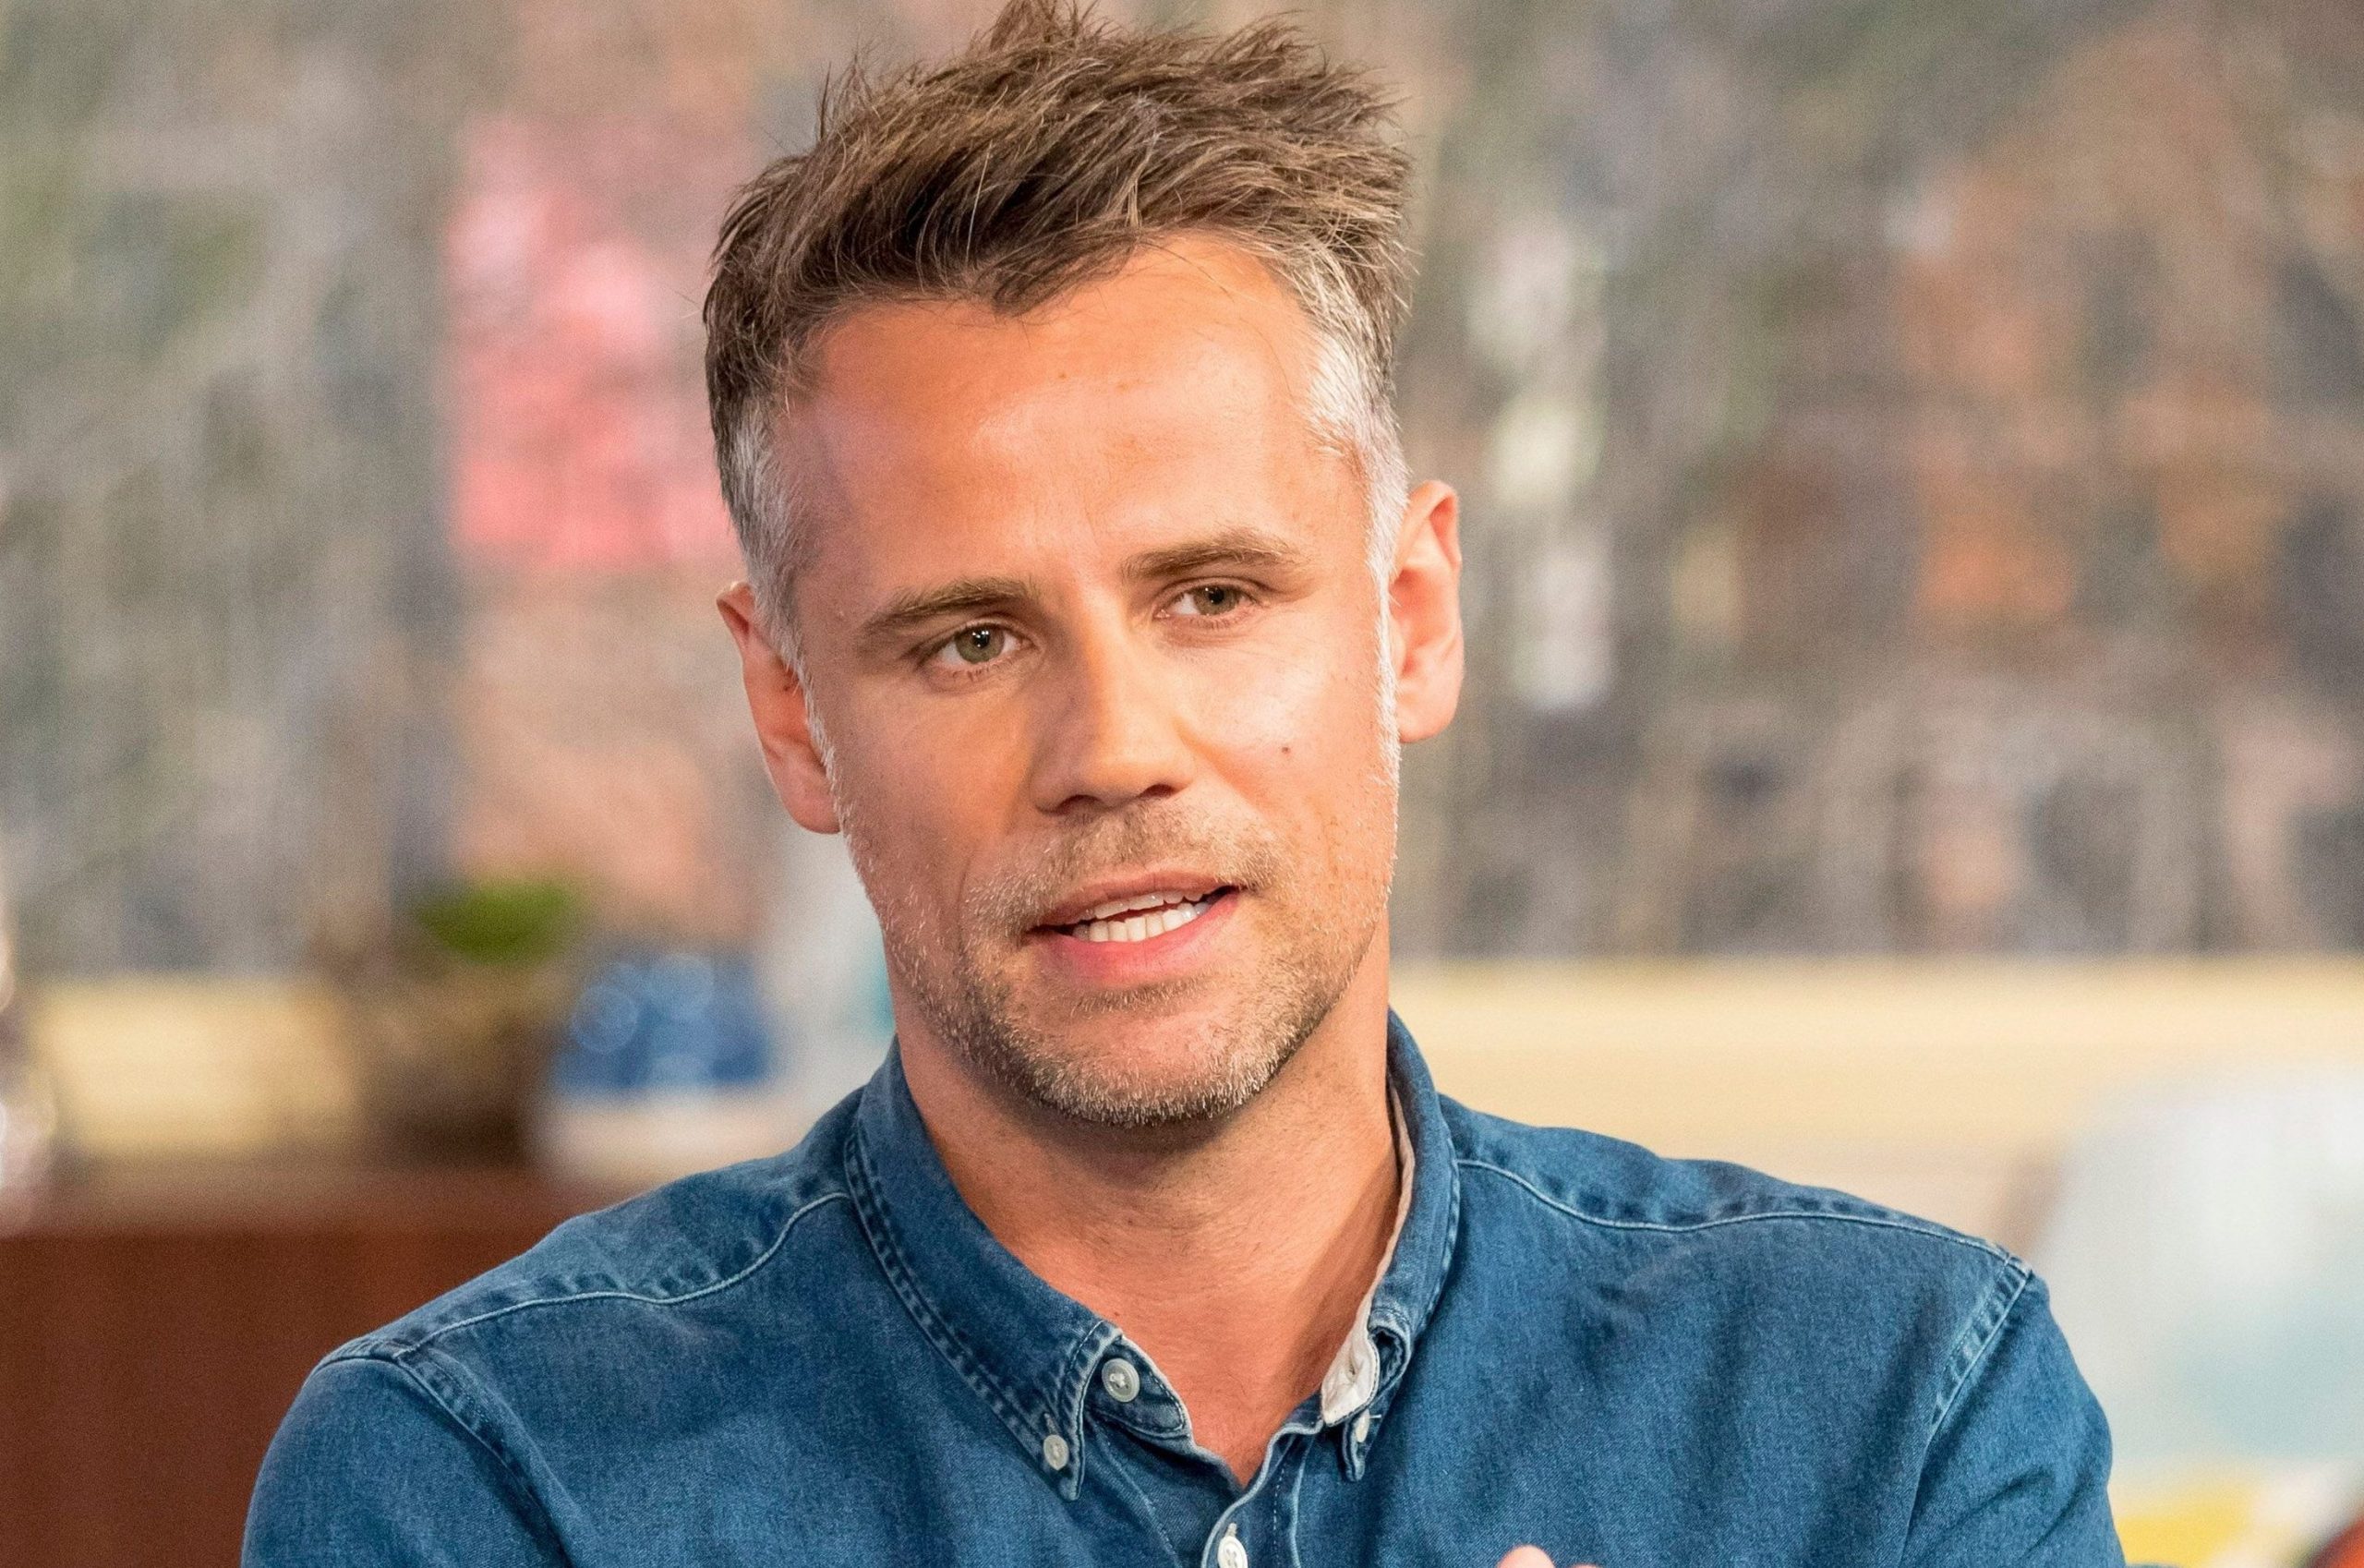 Richard Bacon's retirement from Good Morning Britain was a source of humiliation.